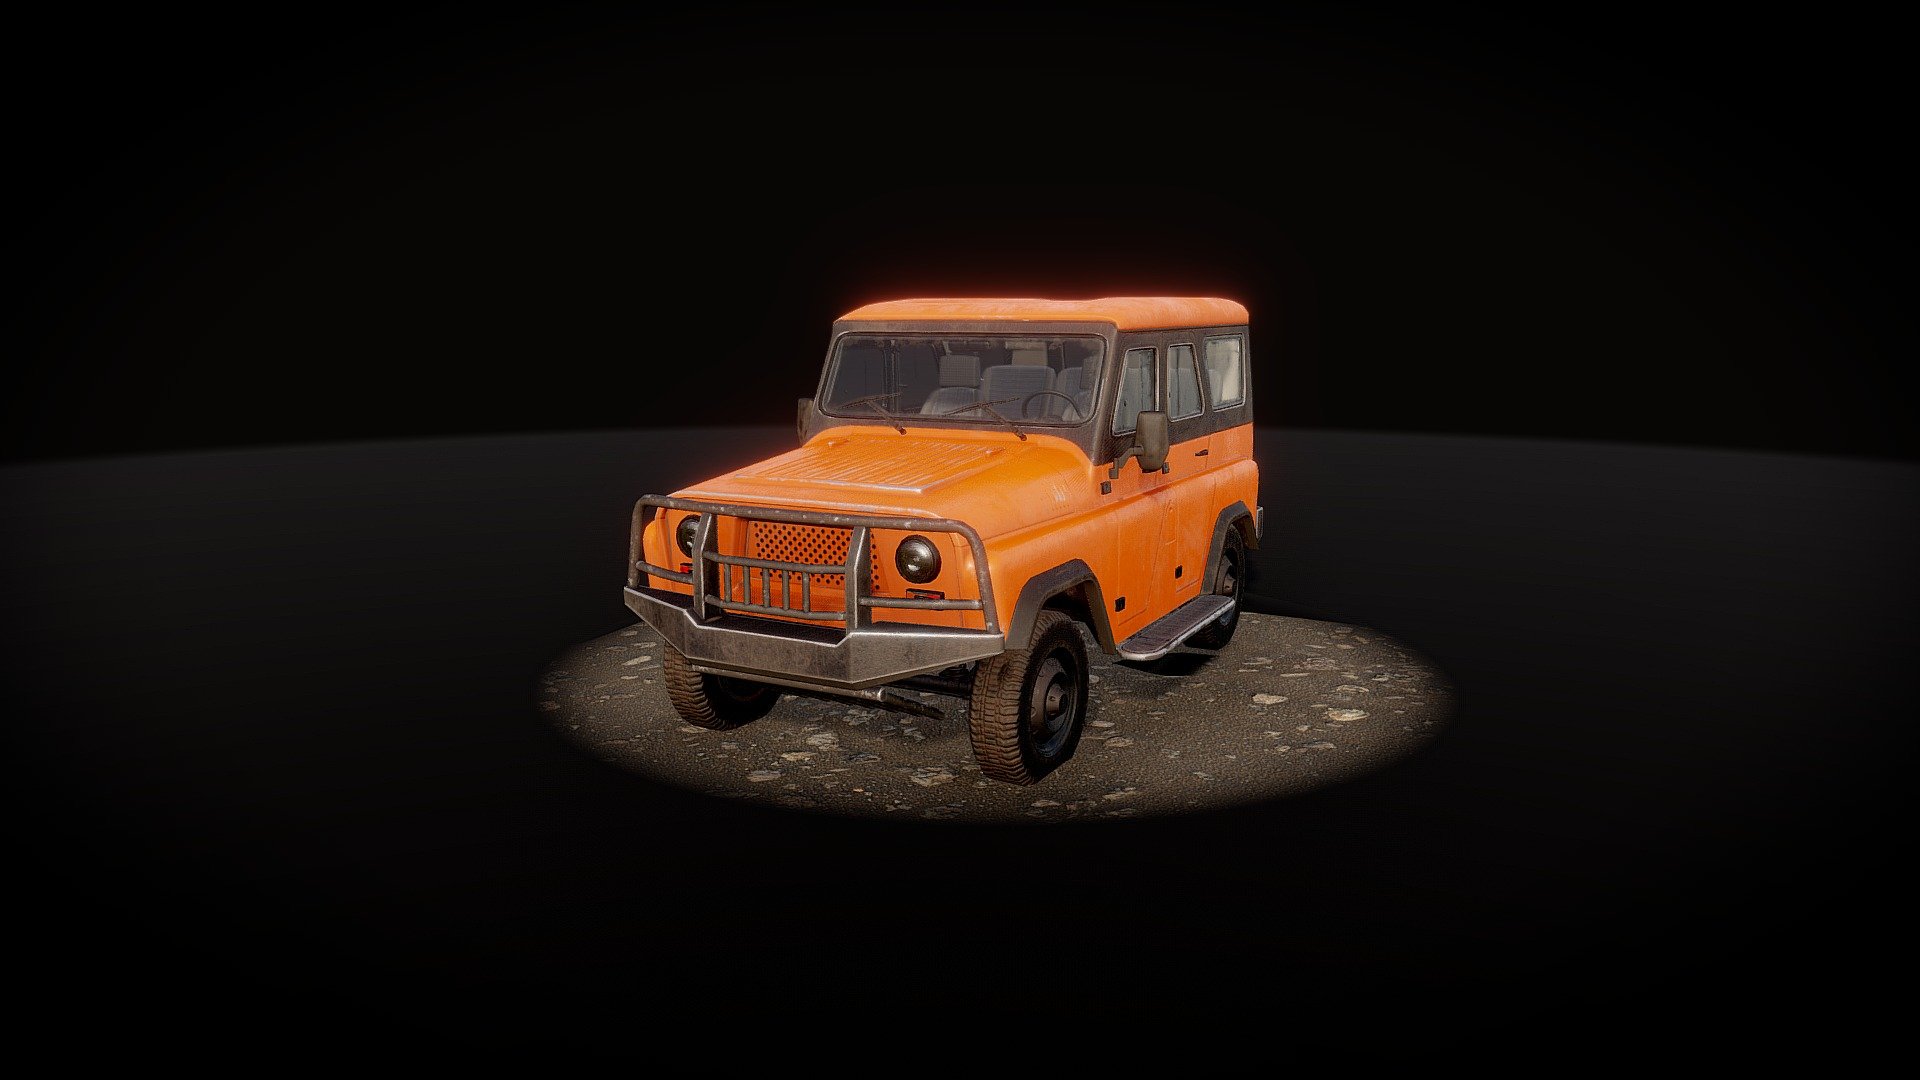 Based on UAZ Hunter Expedition Edition, inspired by the SnowRunner game
_
With this project I would to improve my rigging skills, work with animation modifier in Blender and discover Marmoset Toolbag for myself. Made in Blender and Substance Painter.

Full project: https://www.artstation.com/artwork/aRKa3q

YouTube: https://www.youtube.com/watch?v=ie6aHNIu6Wk - Red Expedition (UAZ Hunter) - Download Free 3D model by tafooR 3d model